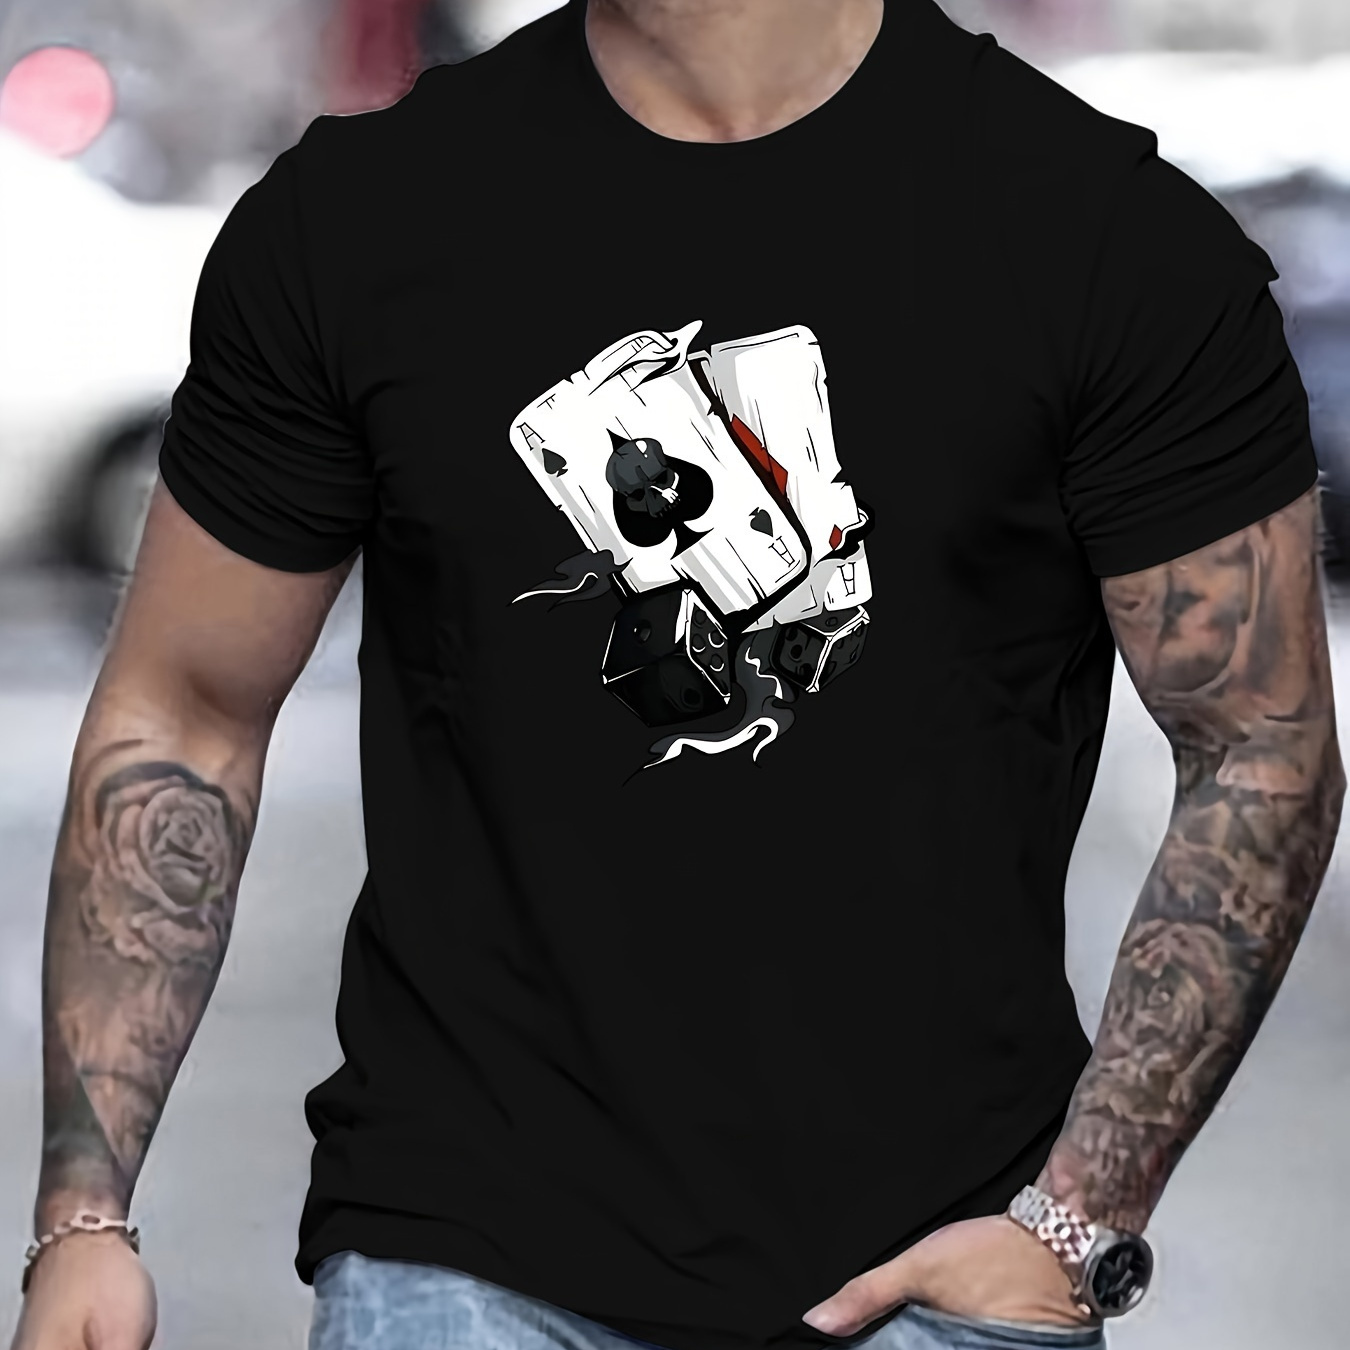 

Aces Print T Shirt, Tees For Men, Casual Short Sleeve T-shirt For Summer